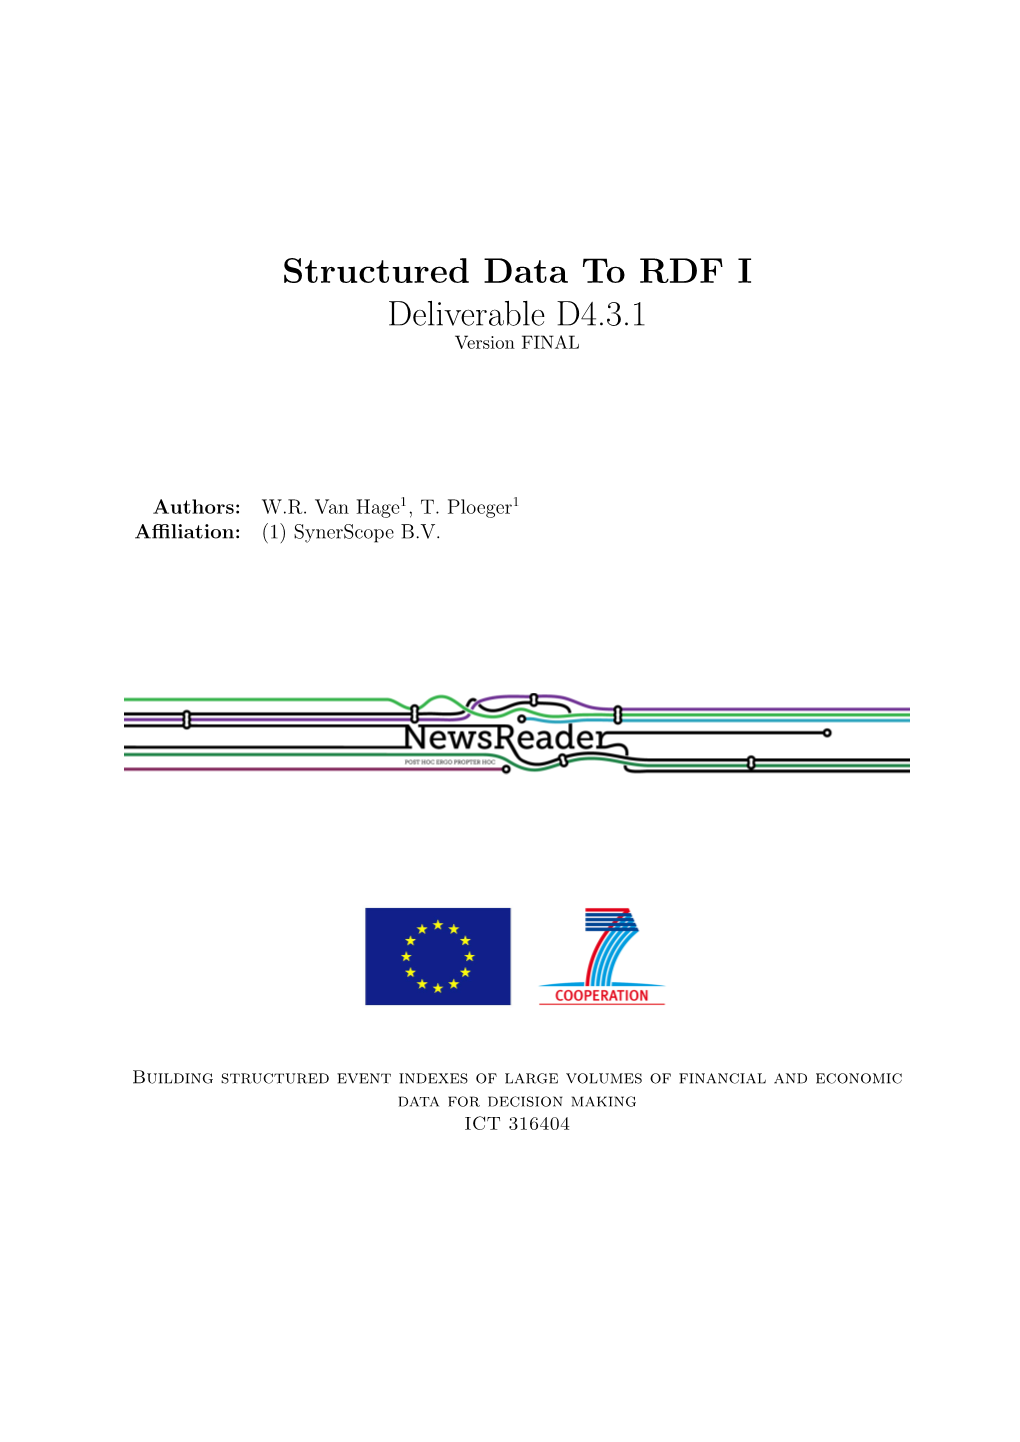 Structured Data to RDF I Deliverable D4.3.1 Version FINAL